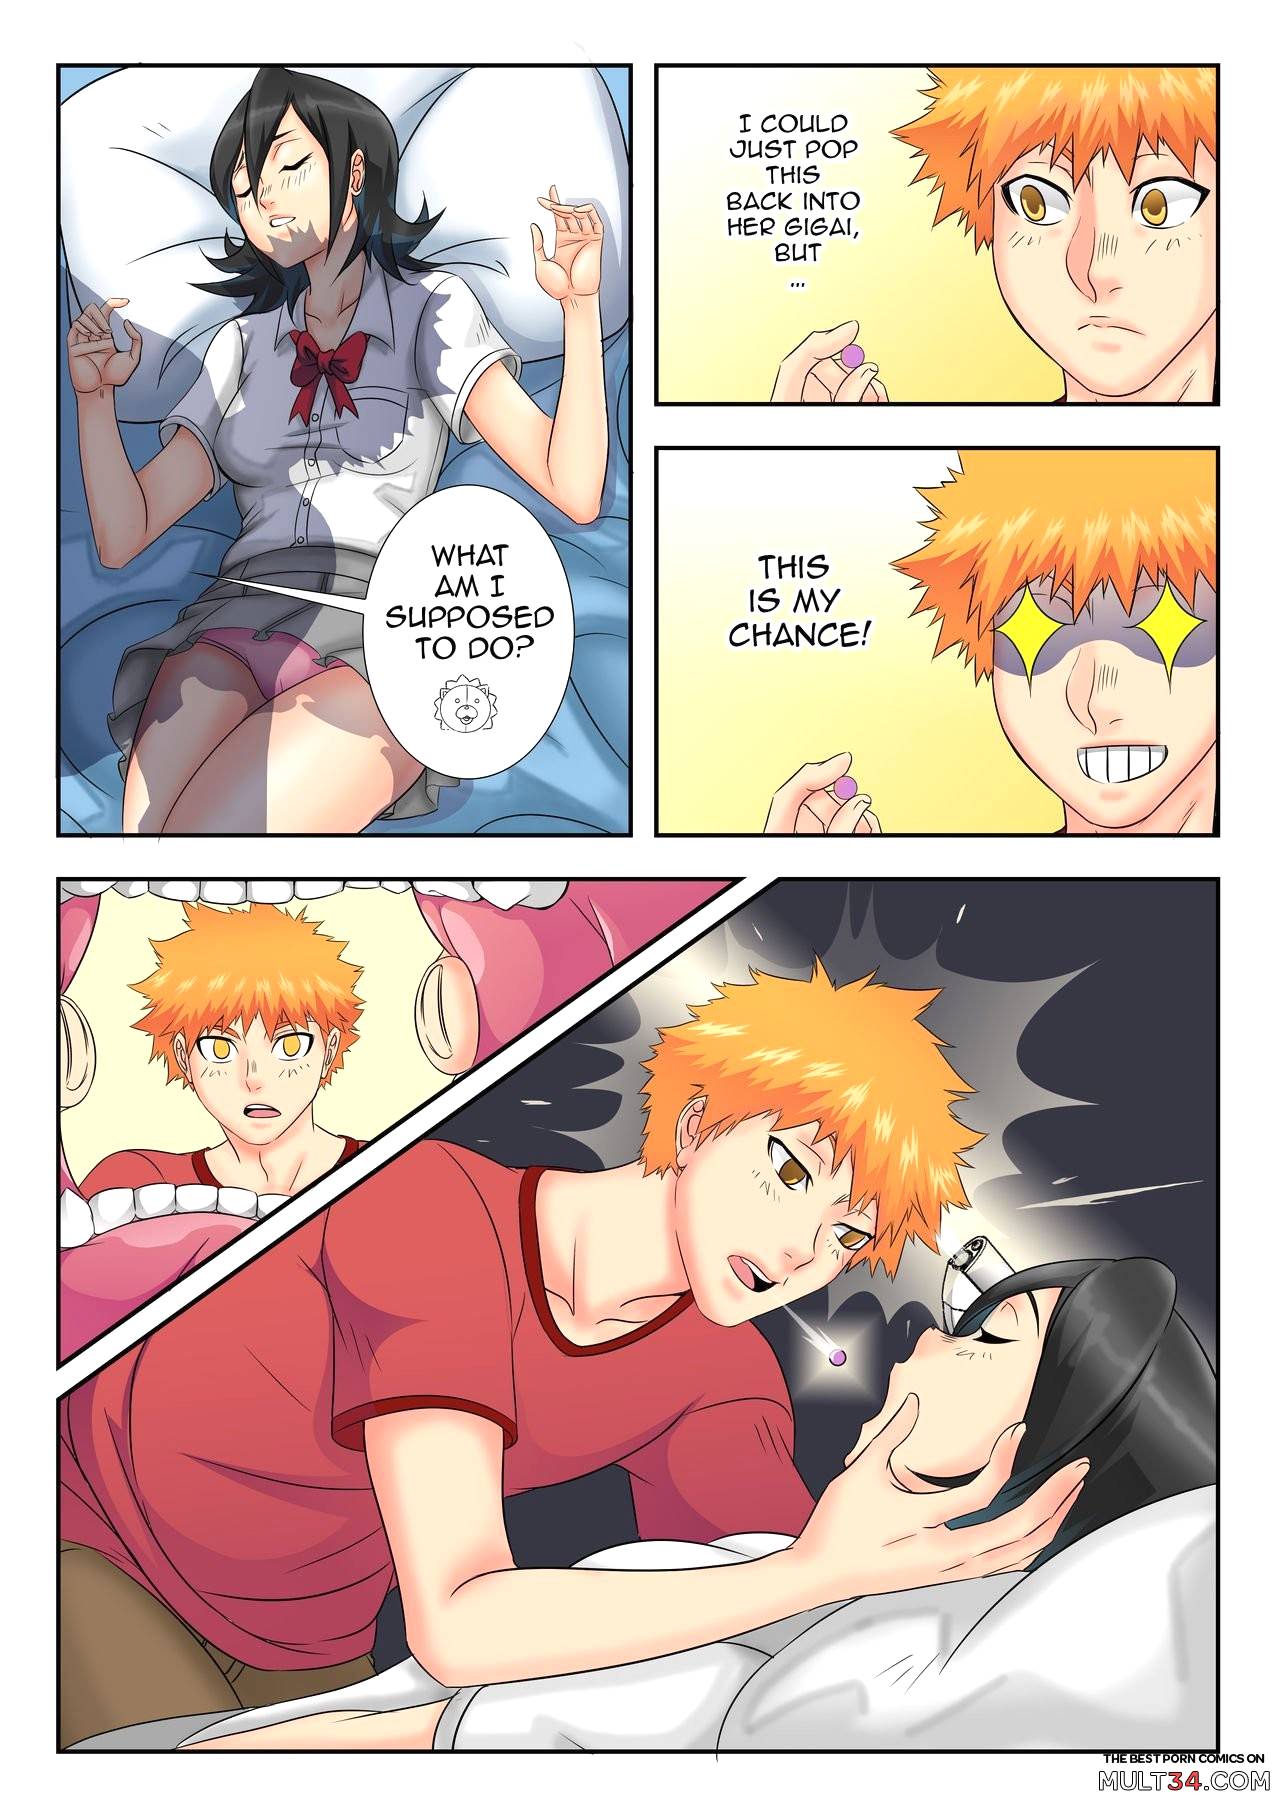 Bleach: A What If Story page 6